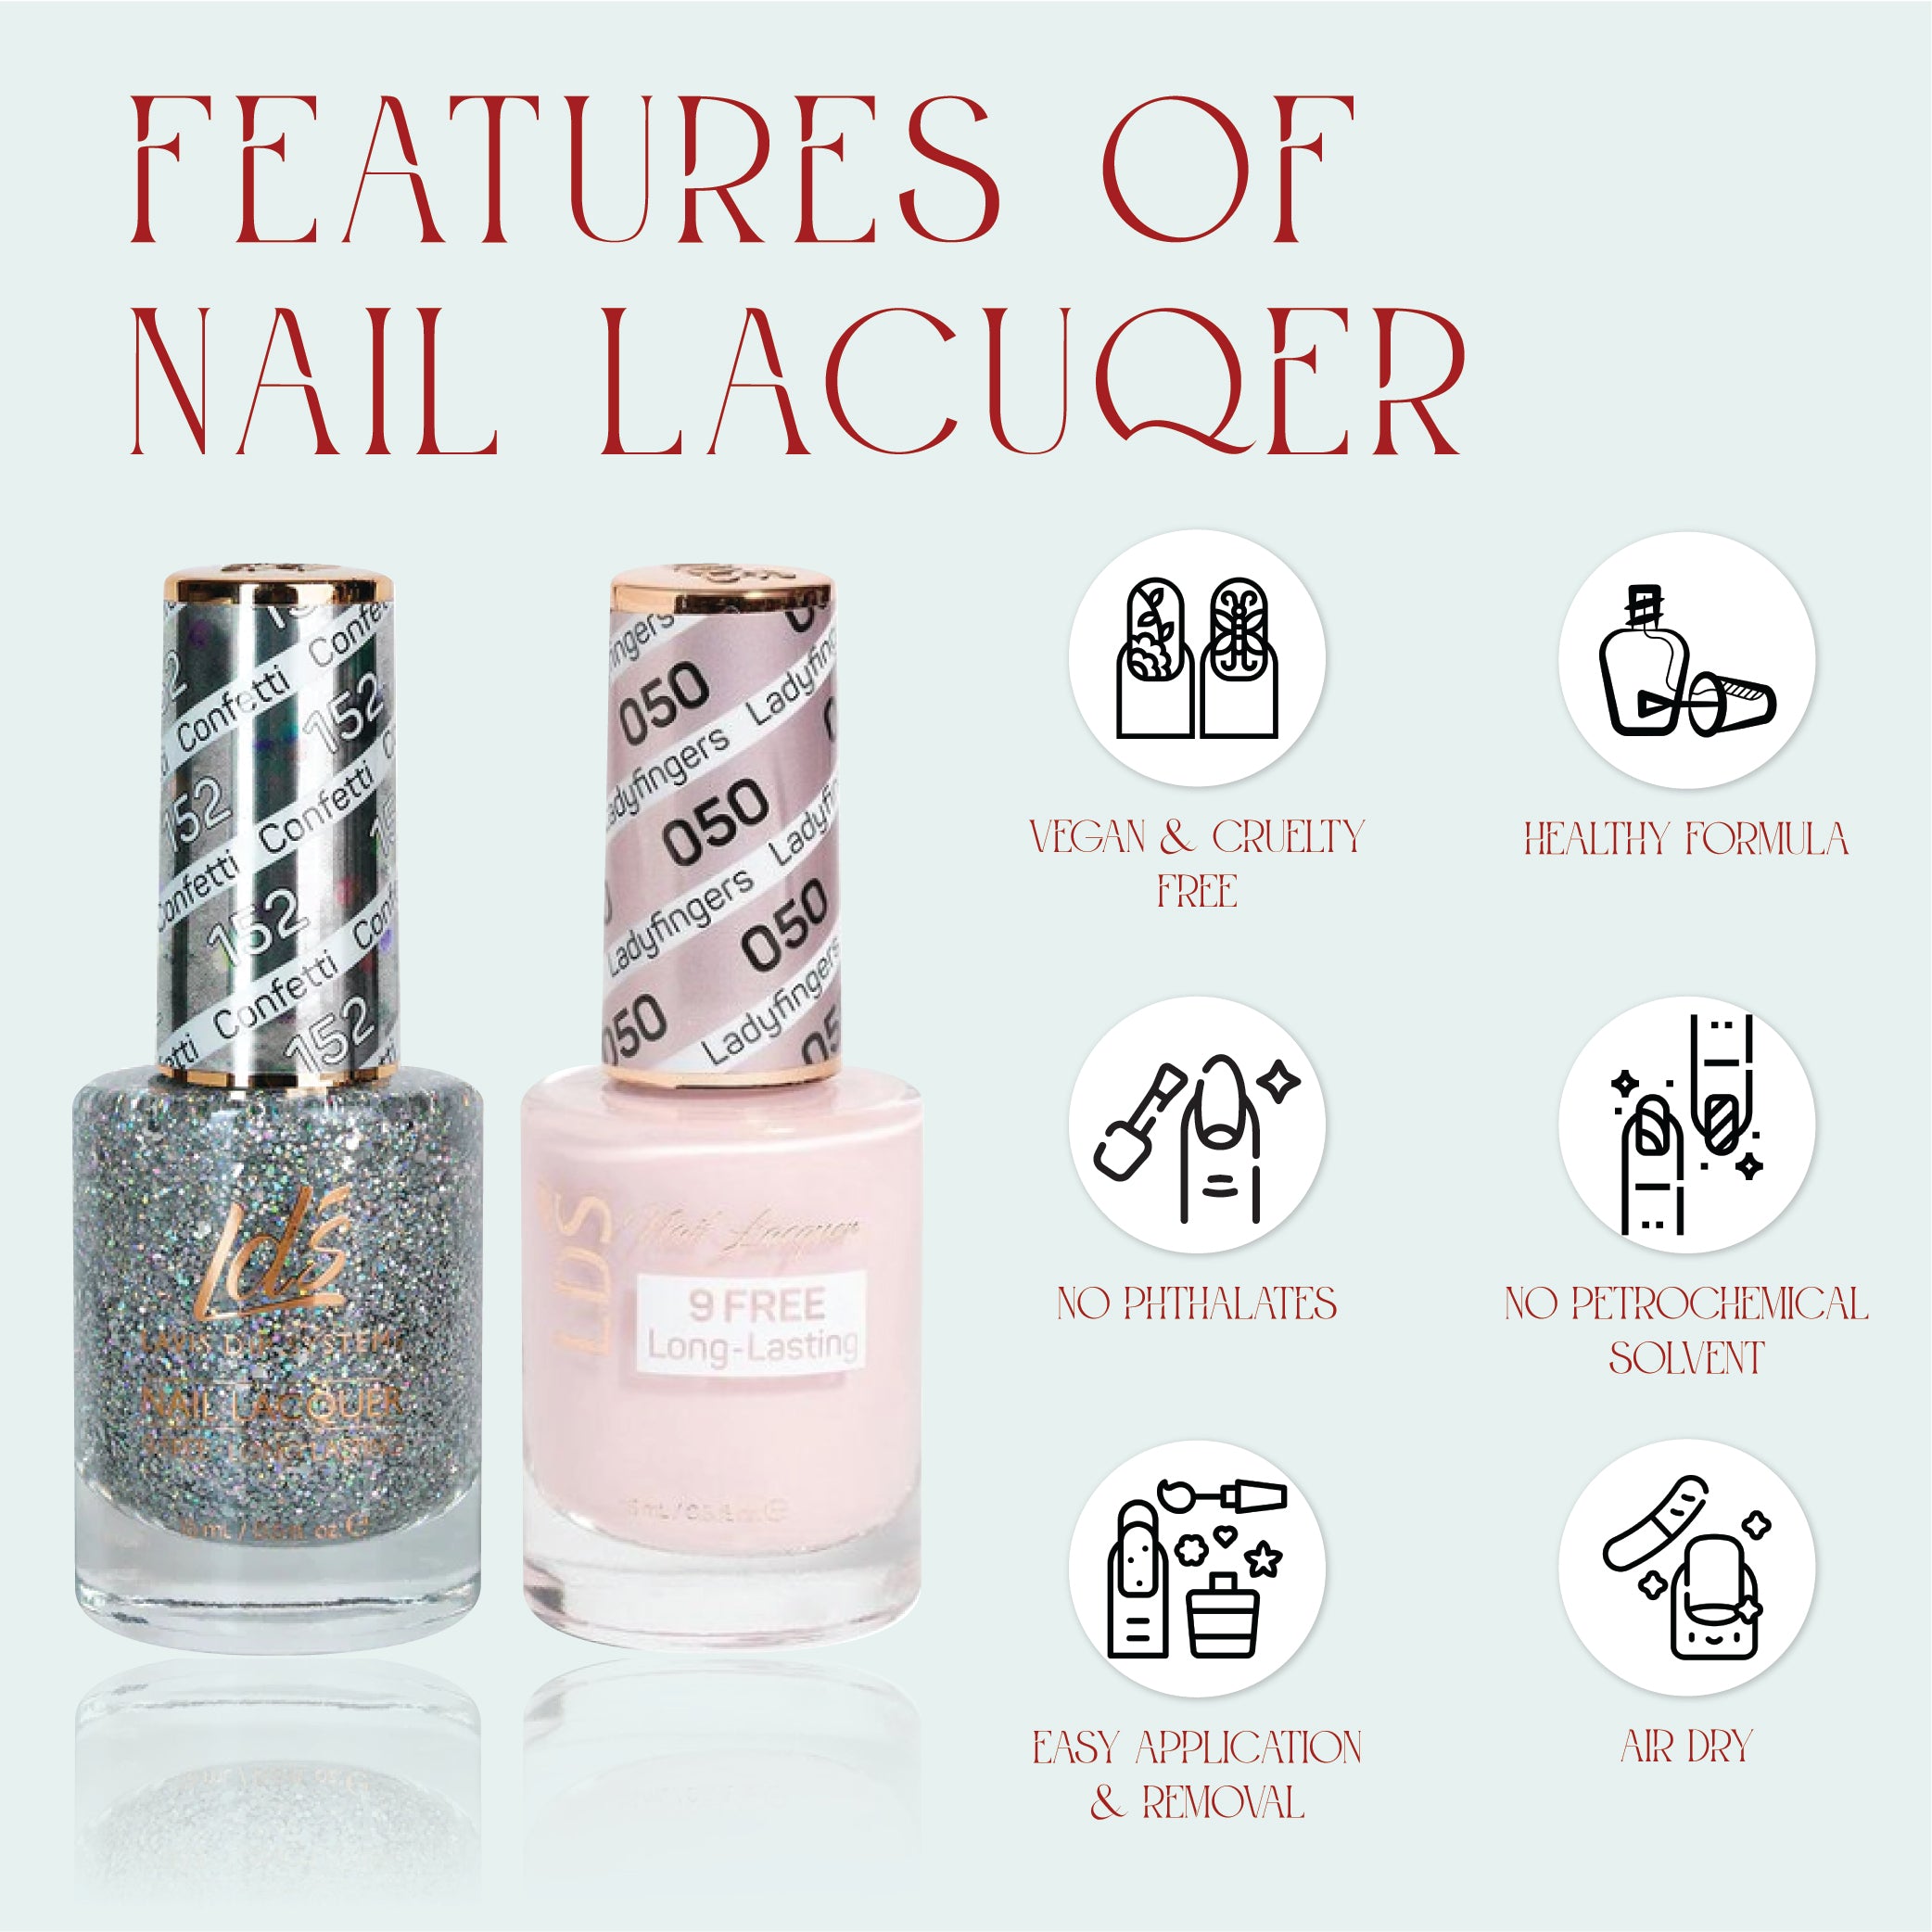 LDS Gel Nail Polish Duo - 123 Beige, Pink Colors - Sweet Candy